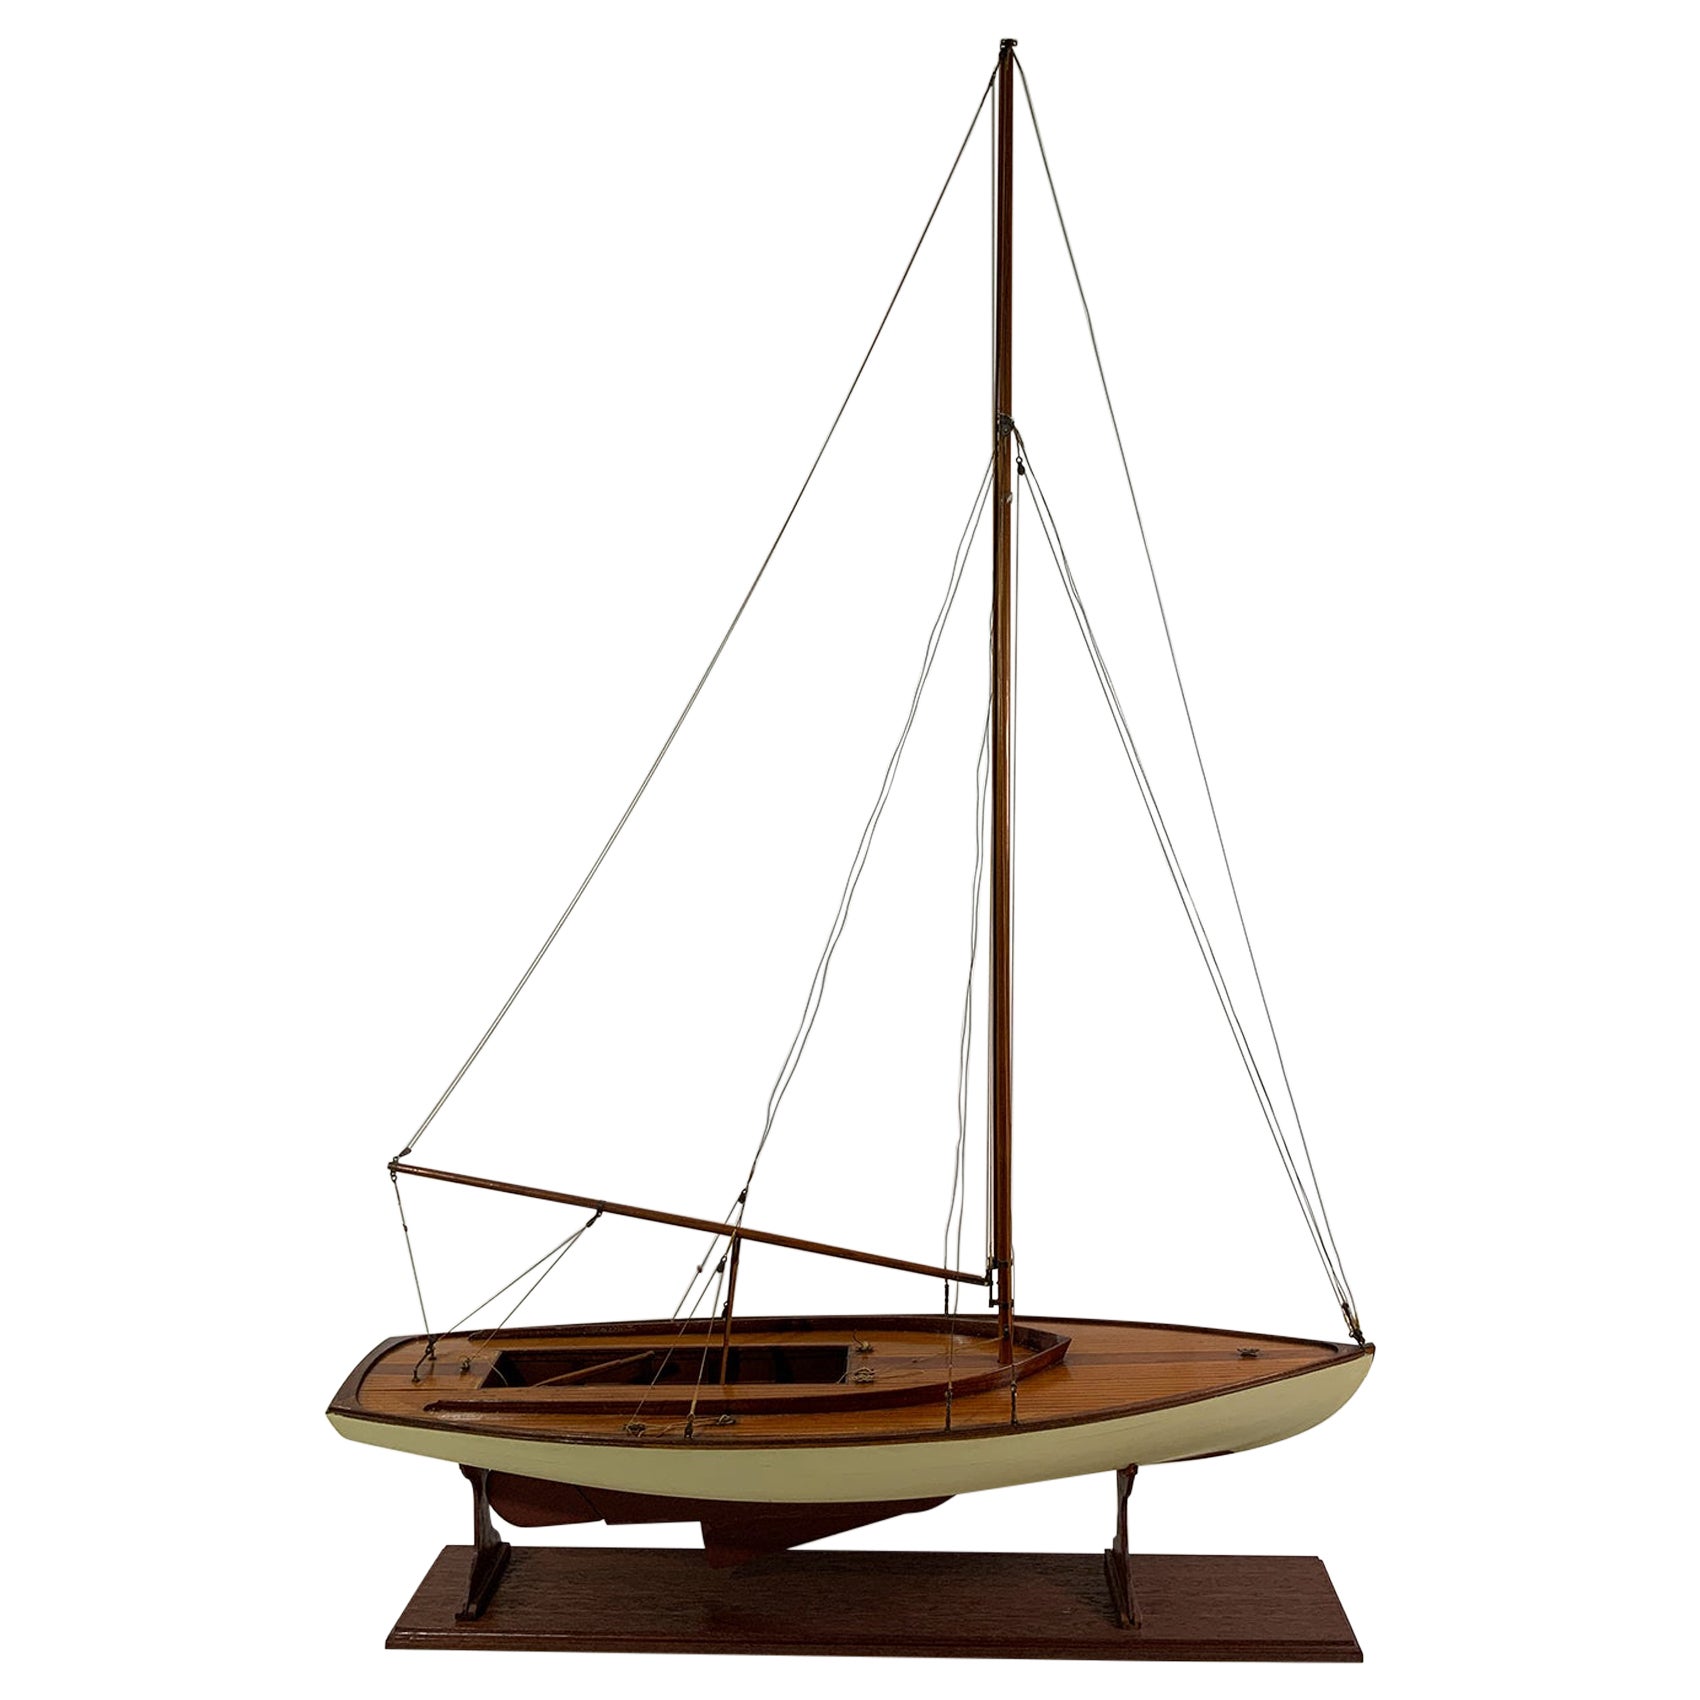 Scale Model of a Herreshoff Yacht